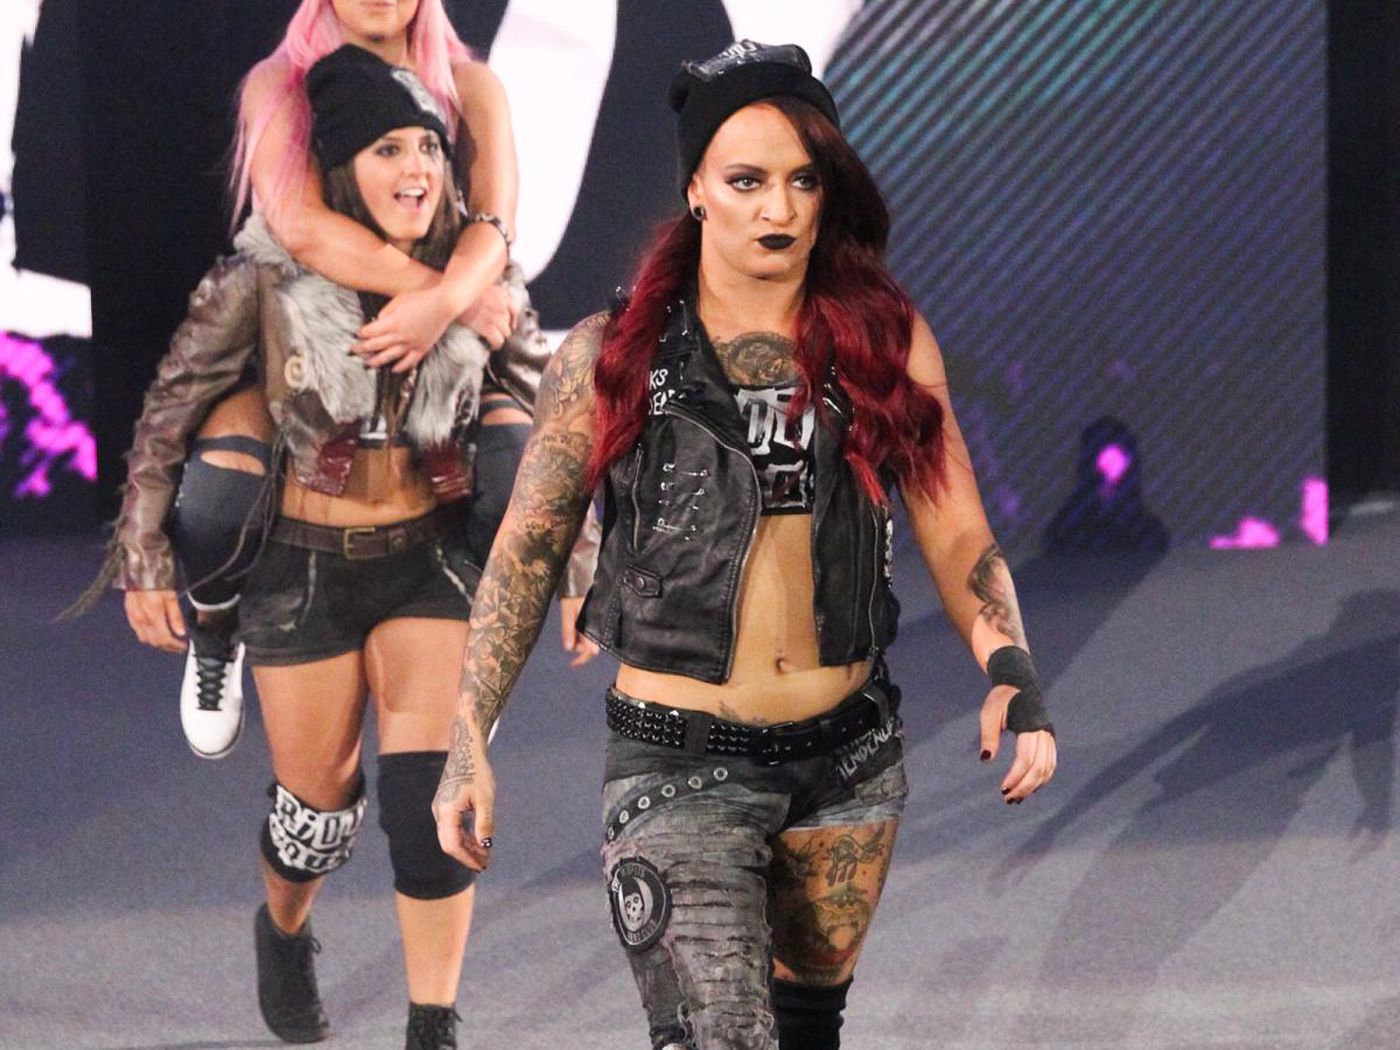 Riott Squad among wrestlers who popped for Ruby Soho's All Out debut - Cageside Seats